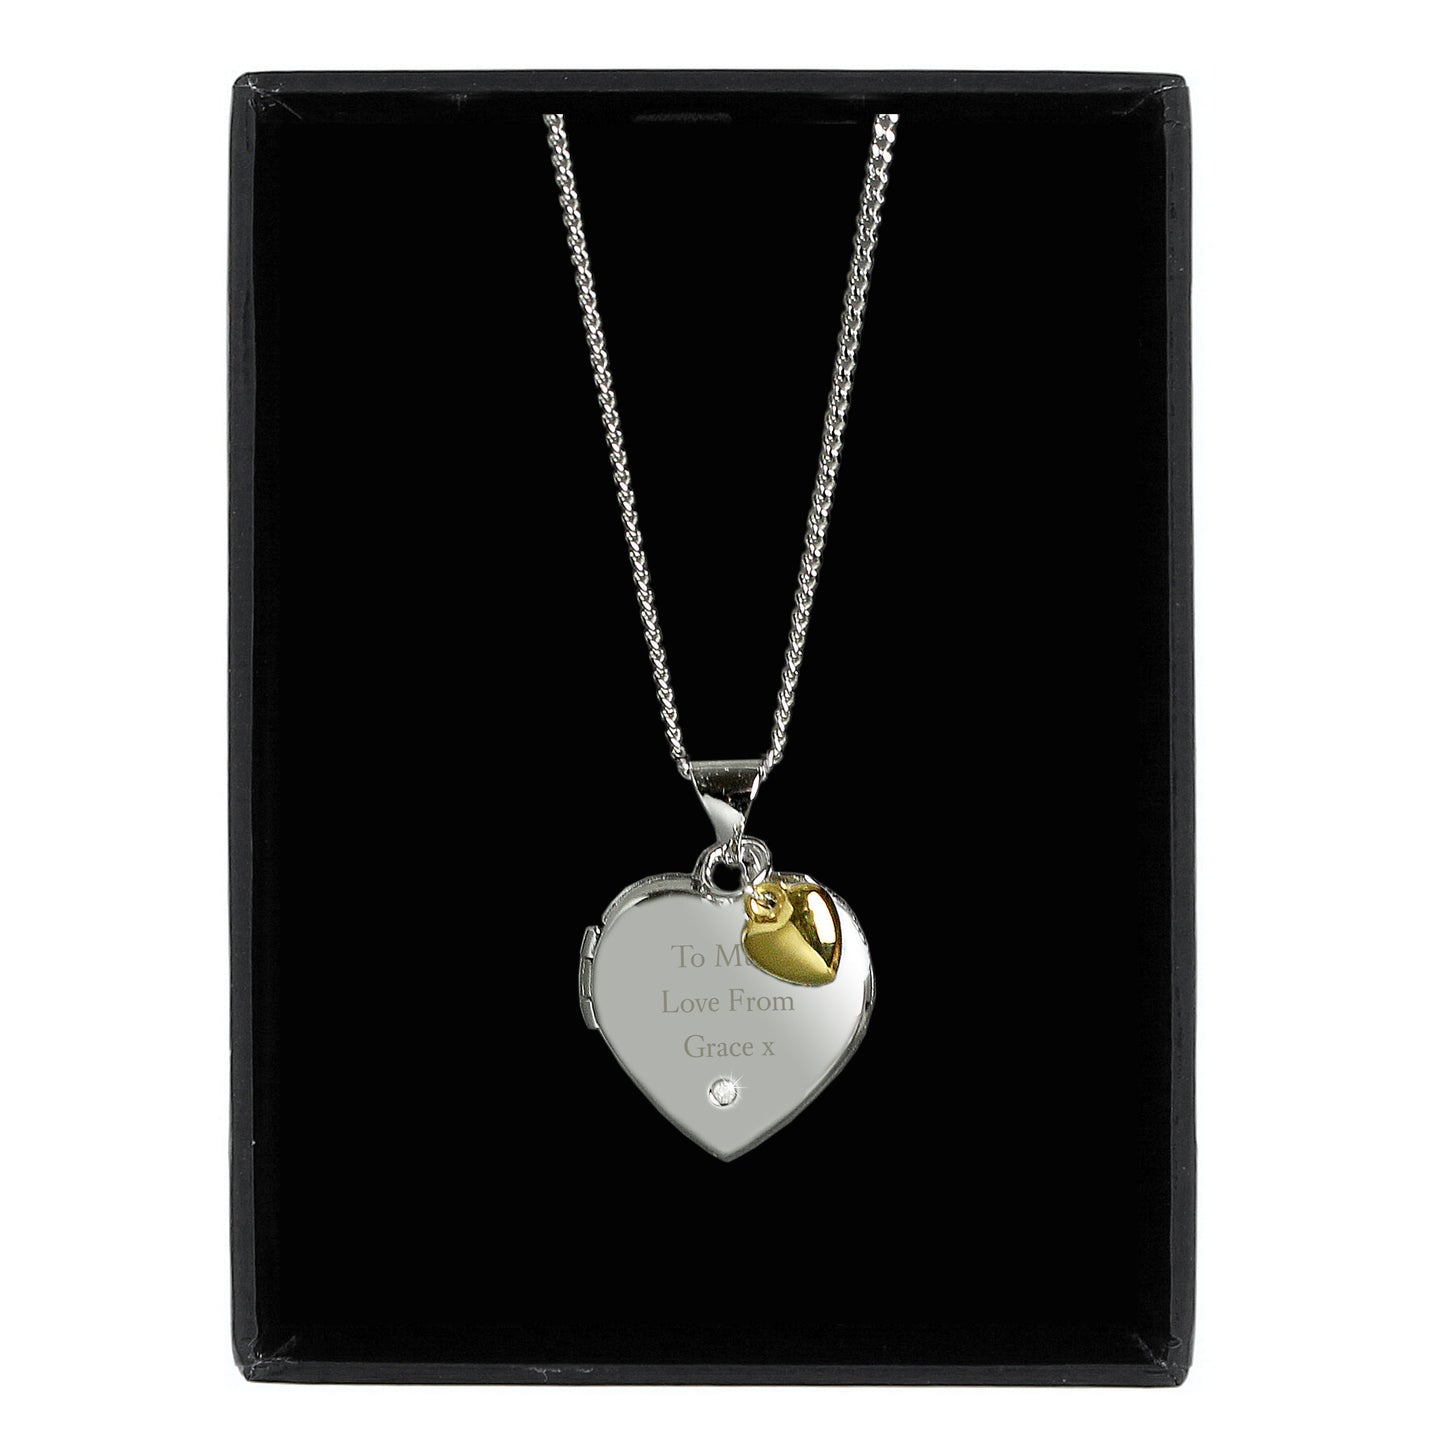 sterling silver heart shaped locket with engraved message and tiny gold heart, in gift box